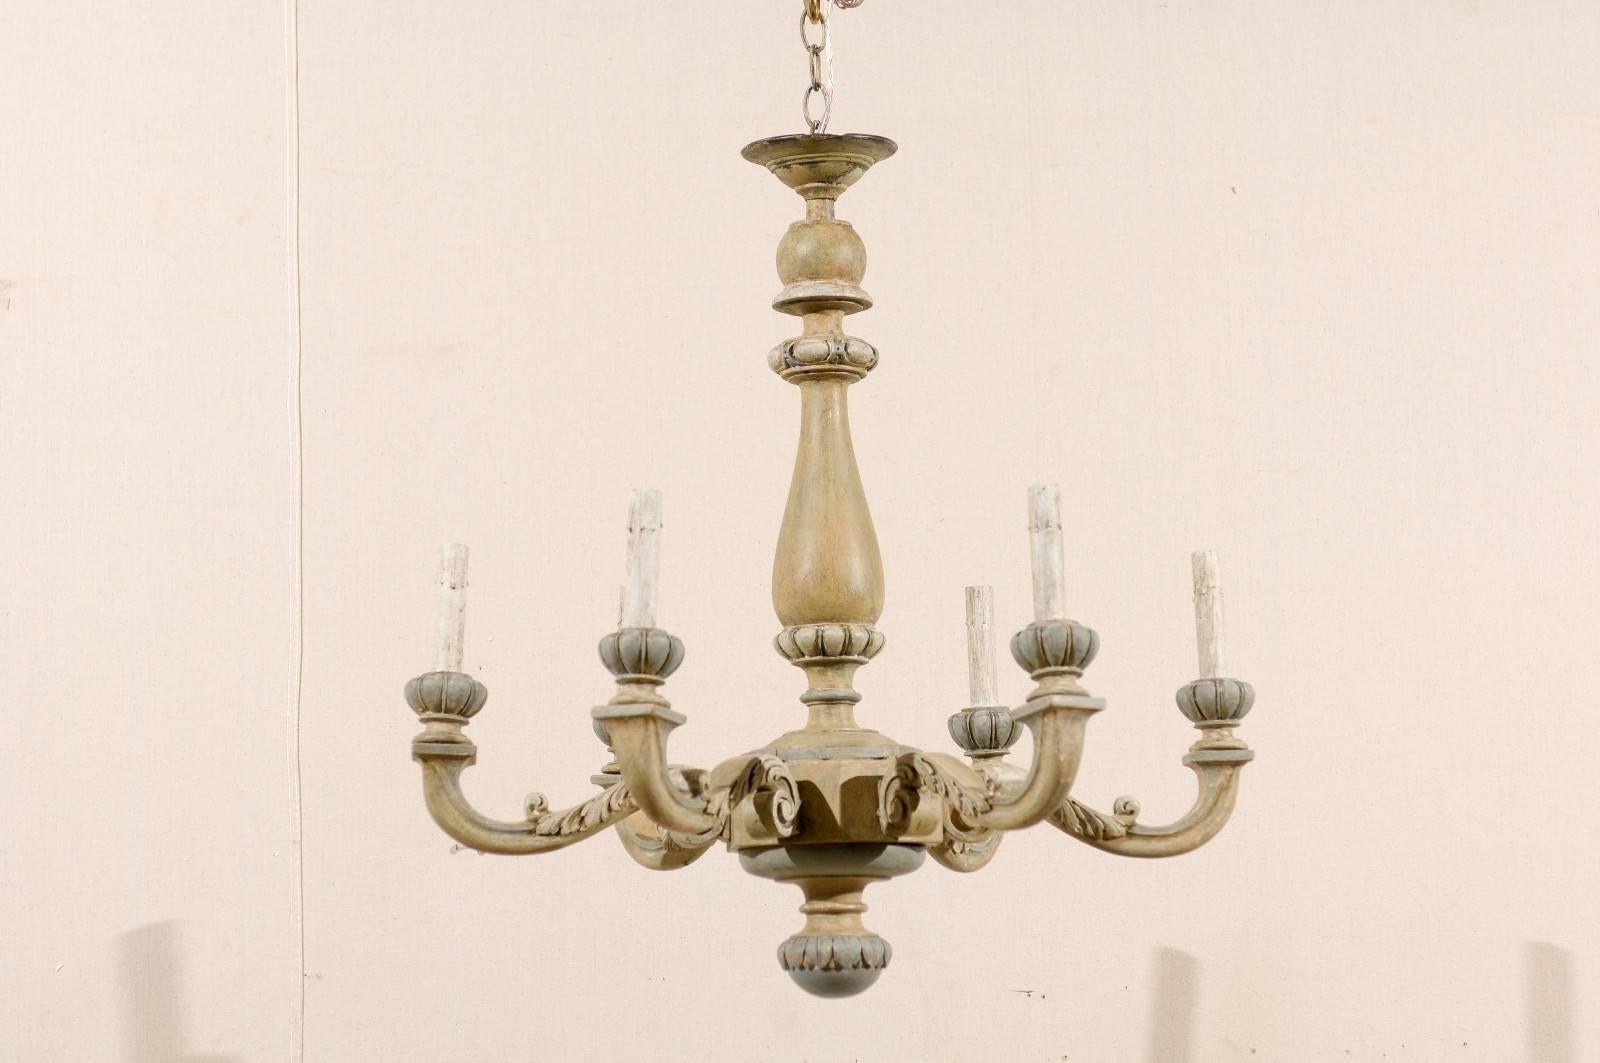 A French carved and painted wood six-light vintage chandelier. This French chandelier from the mid-20th century features a carved central column with six scrolled arms emerging outward that are each adorned with acanthus leaf motifs. This piece is